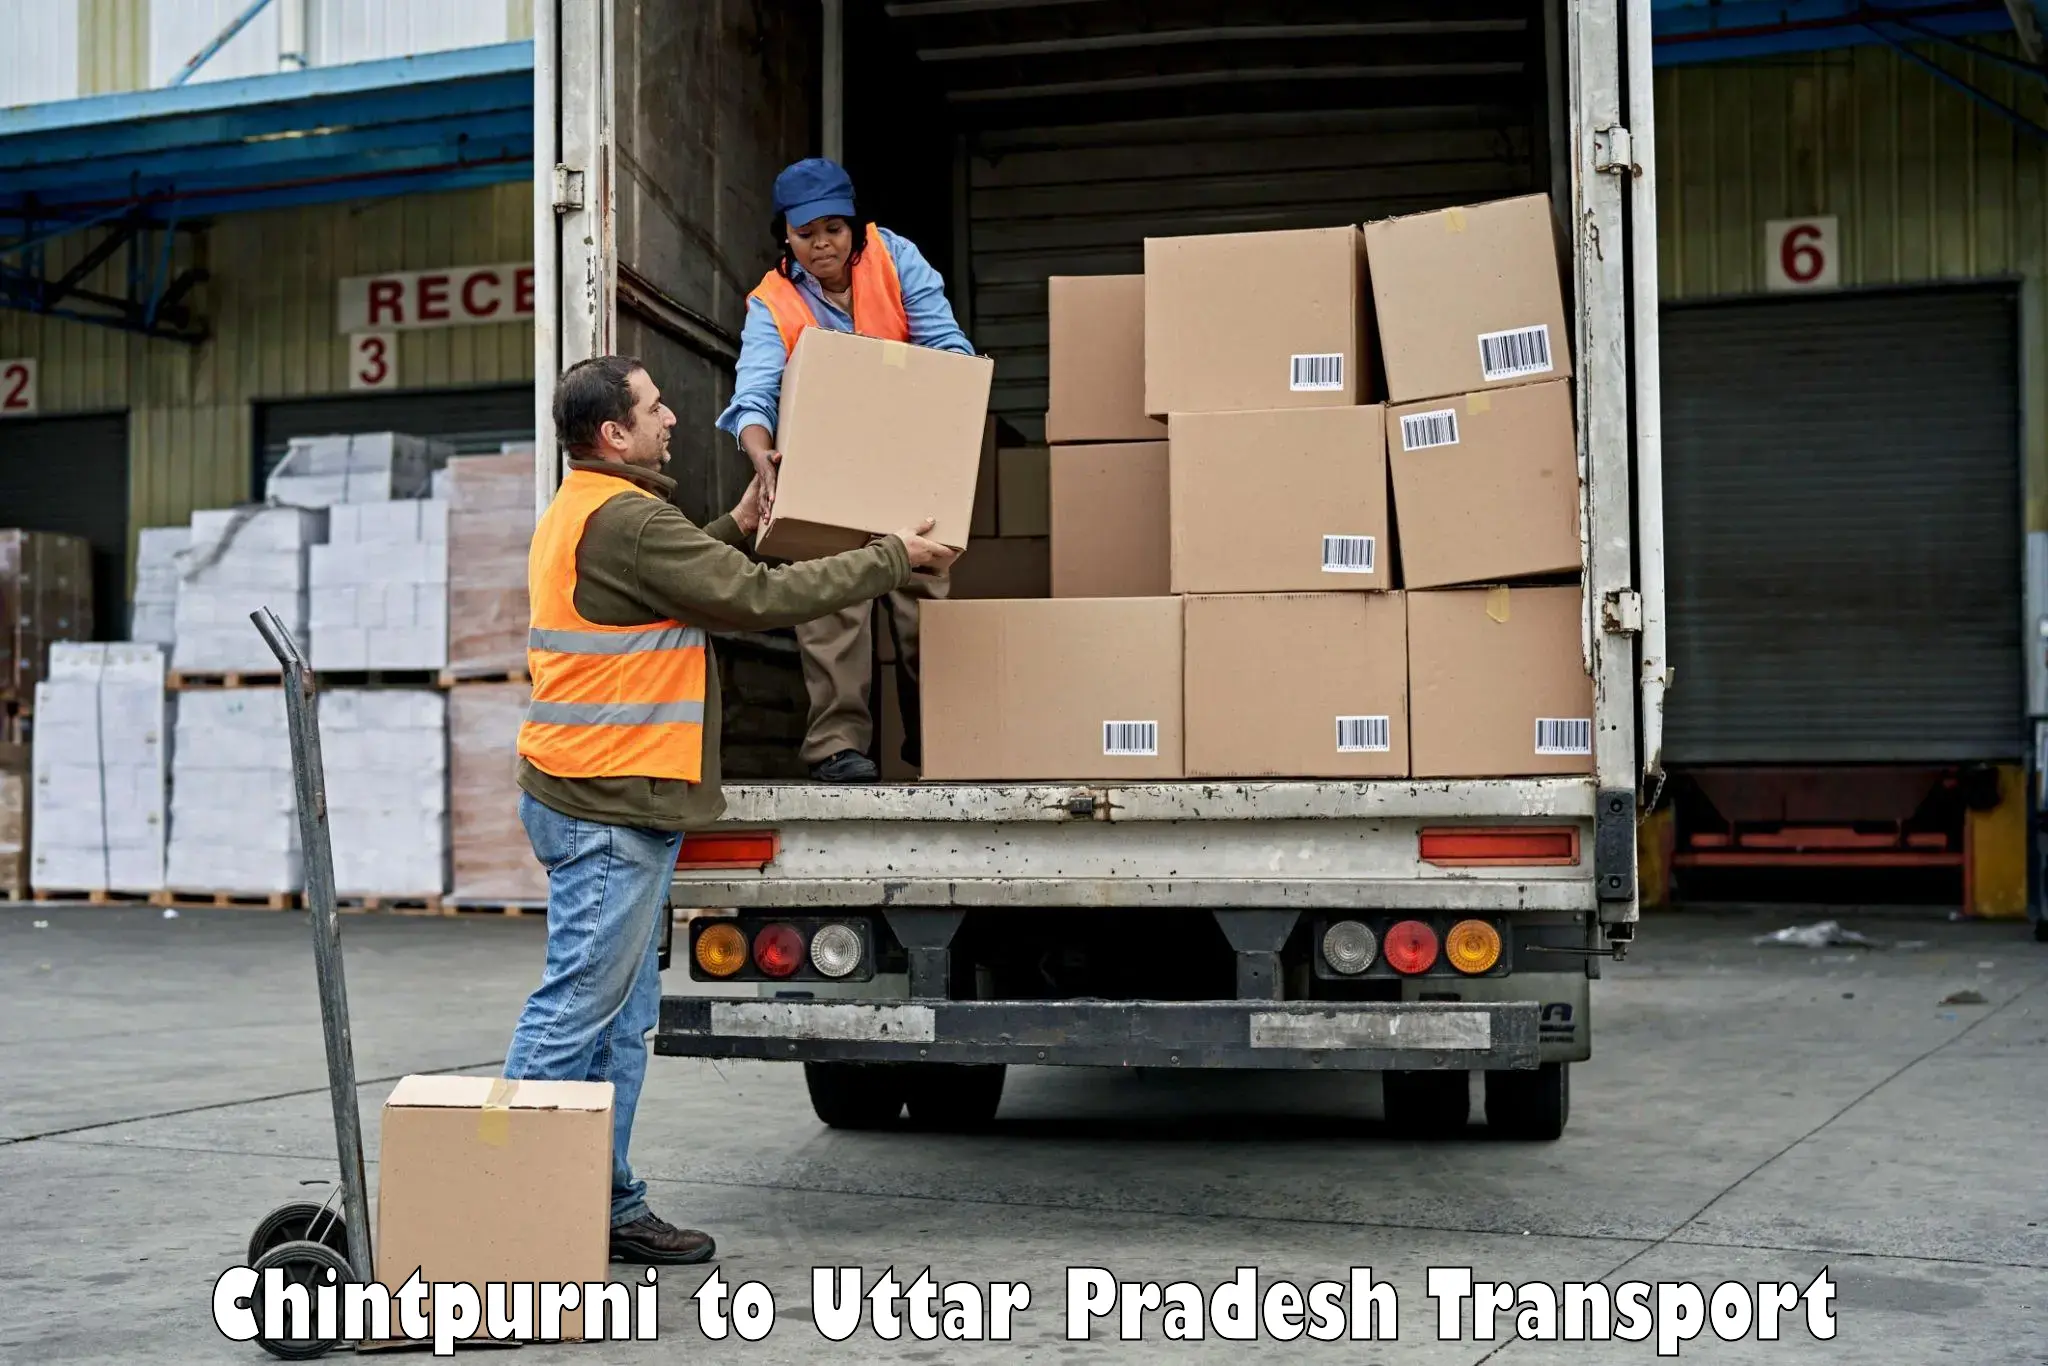 Container transport service Chintpurni to Jalesar